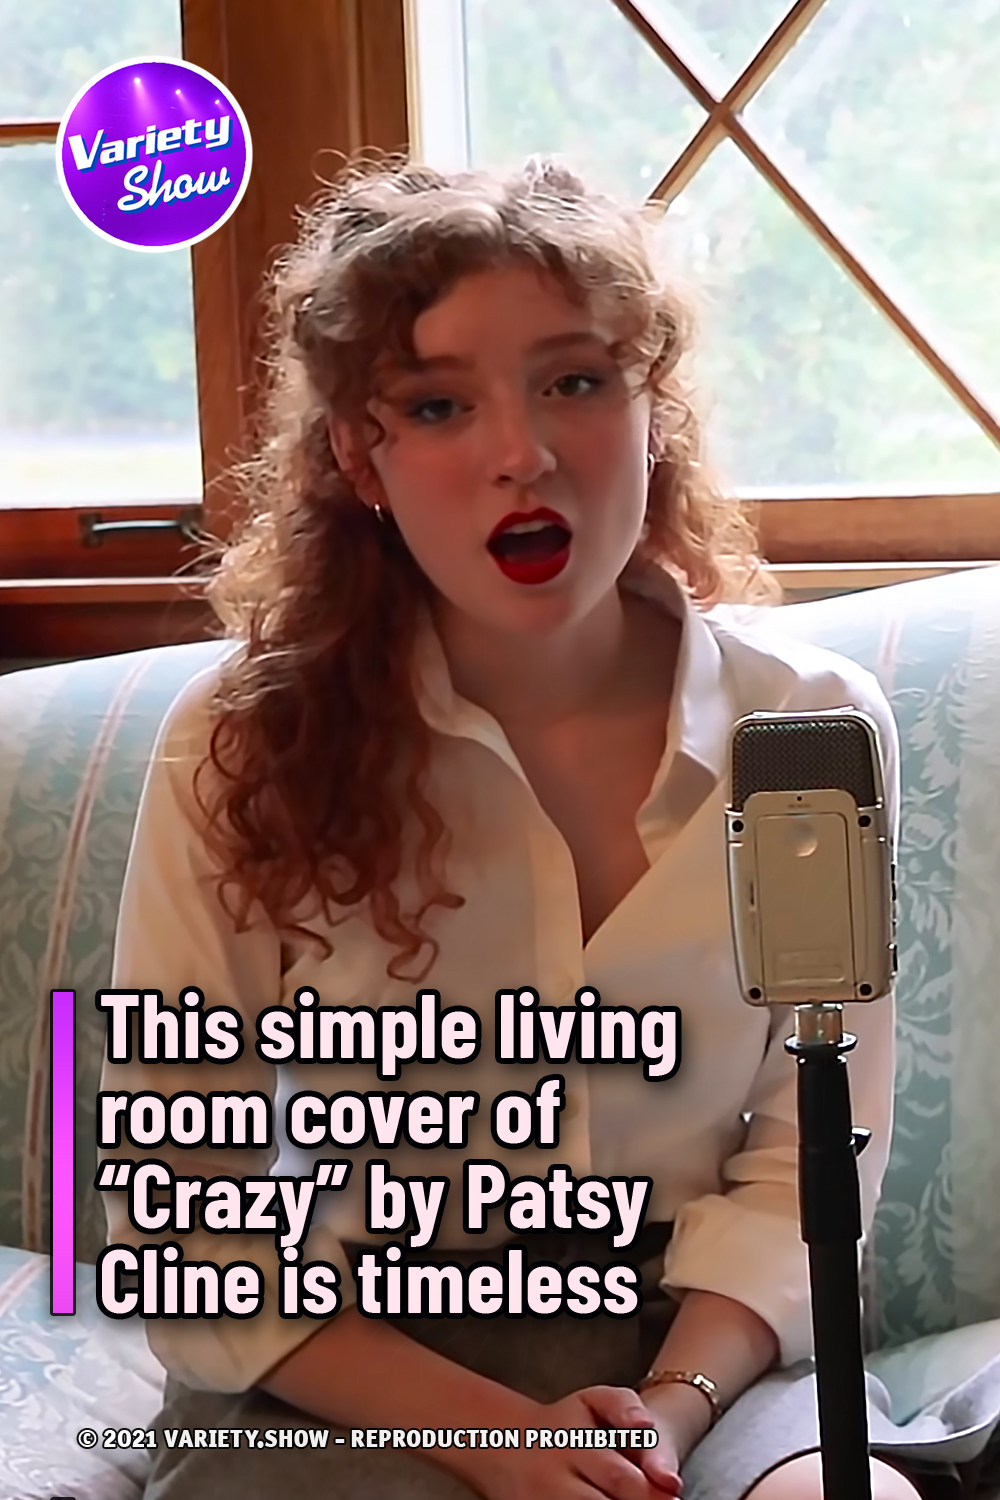 This simple living room cover of “Crazy” by Patsy Cline is timeless